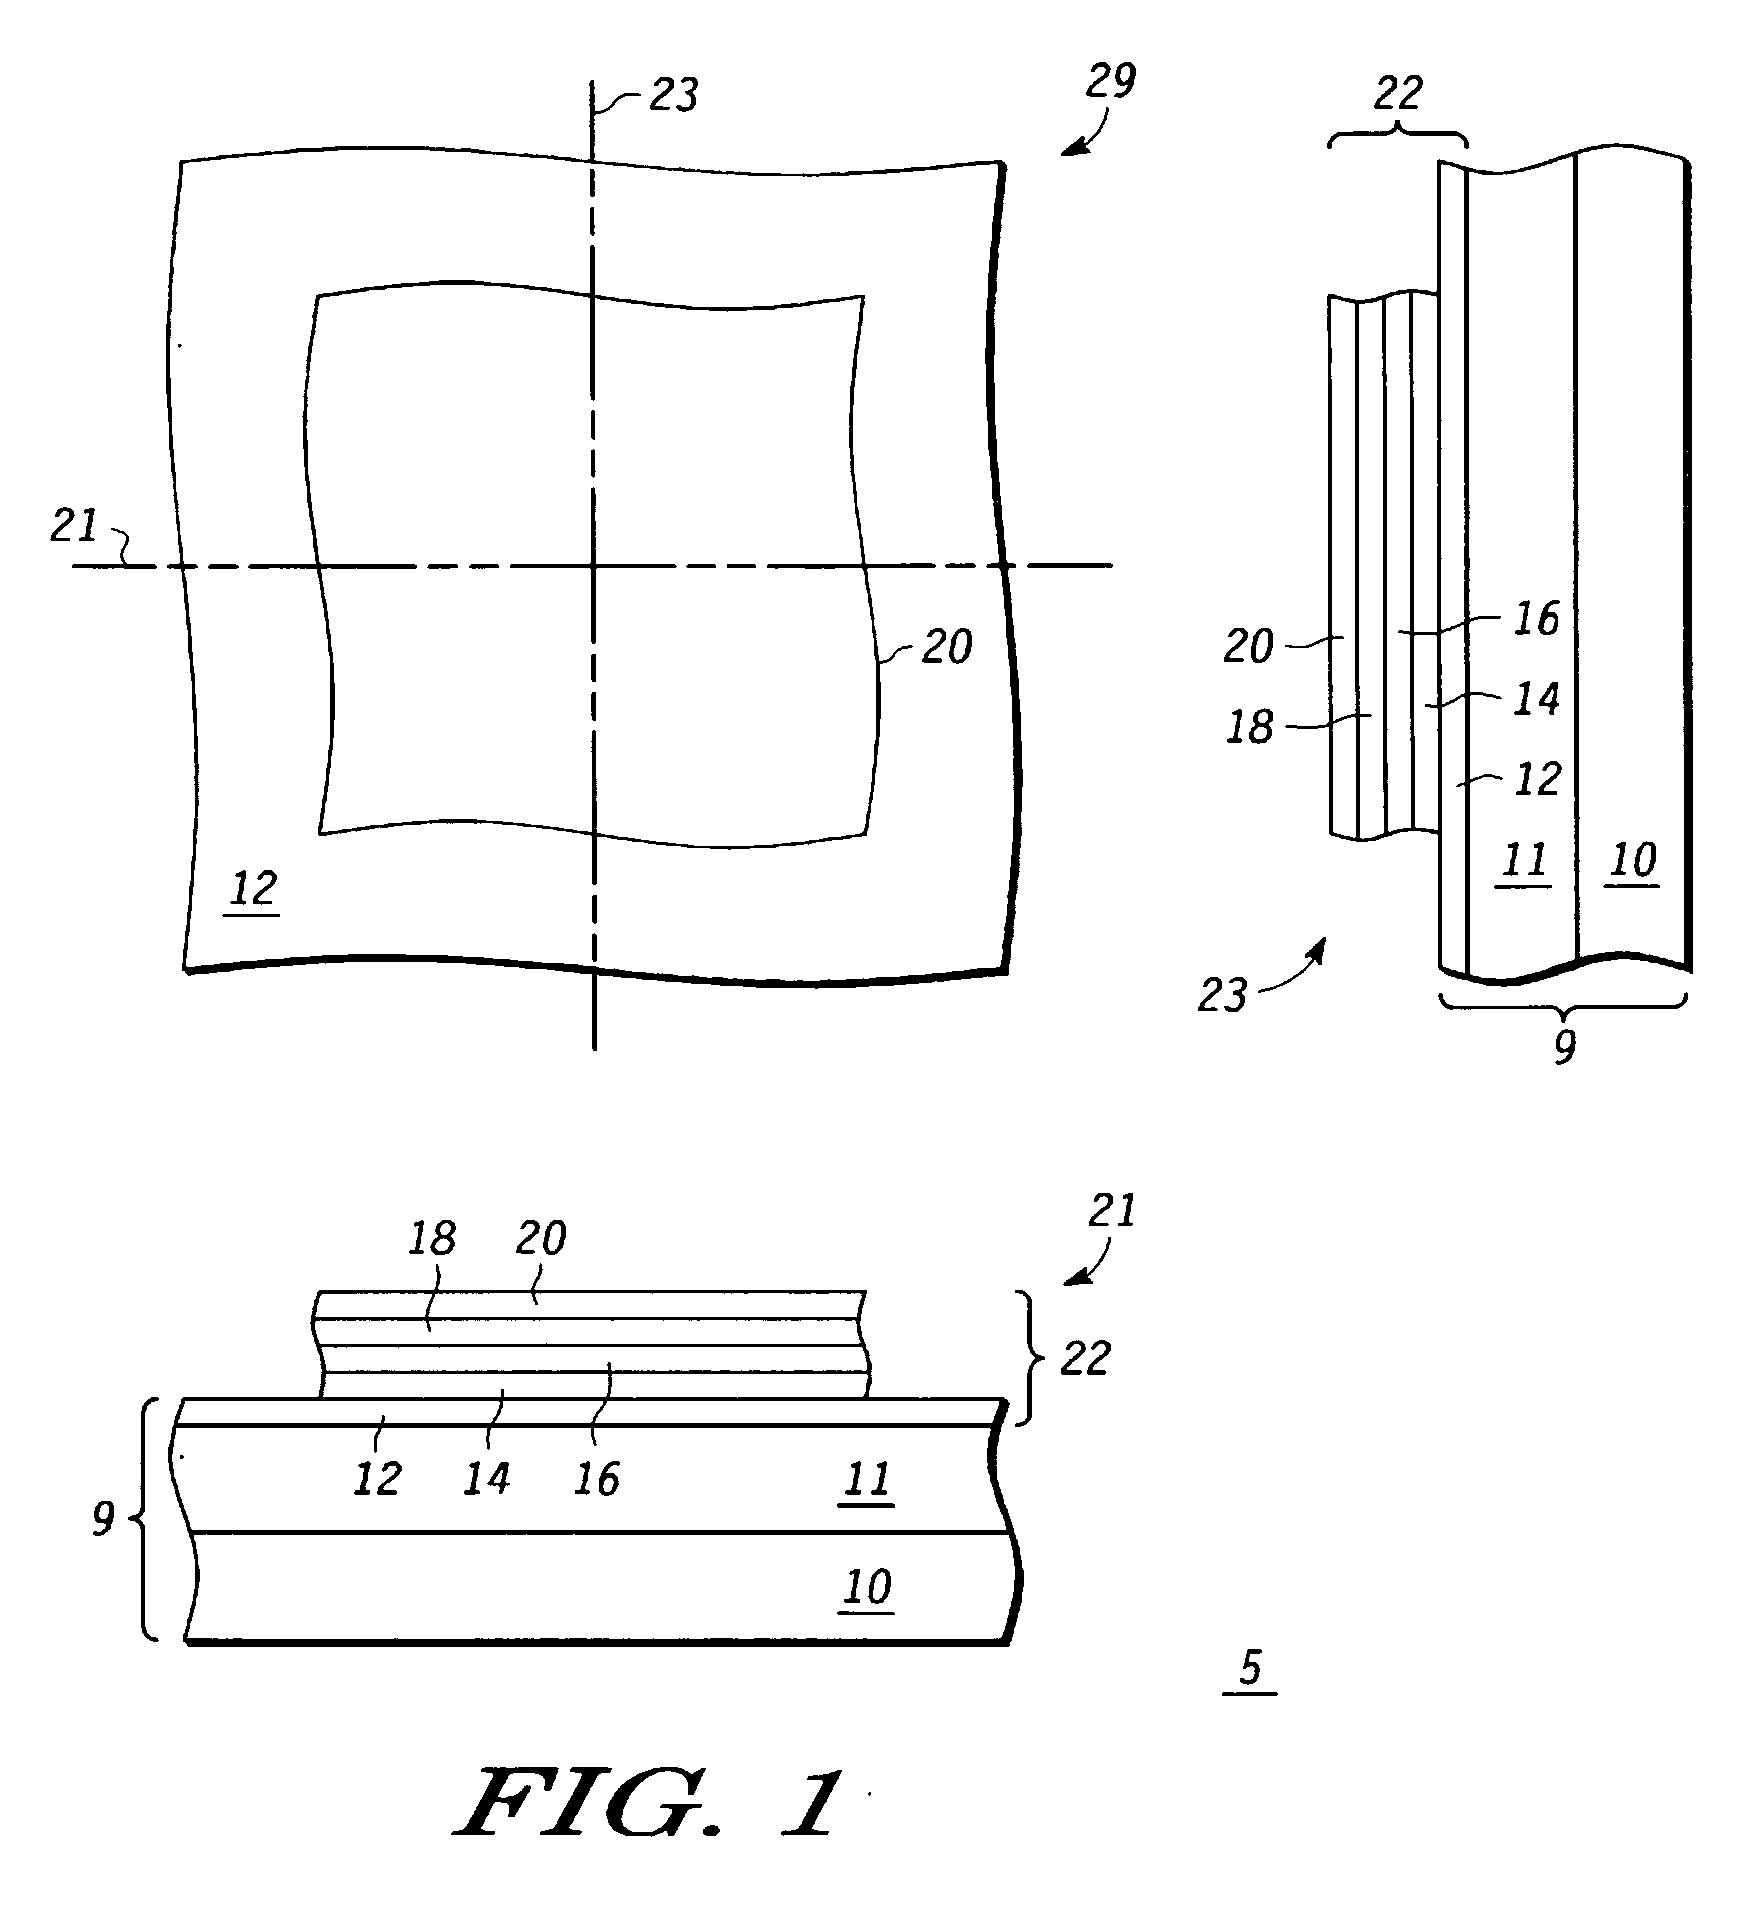 Multi-channel transistor structure and method of making thereof